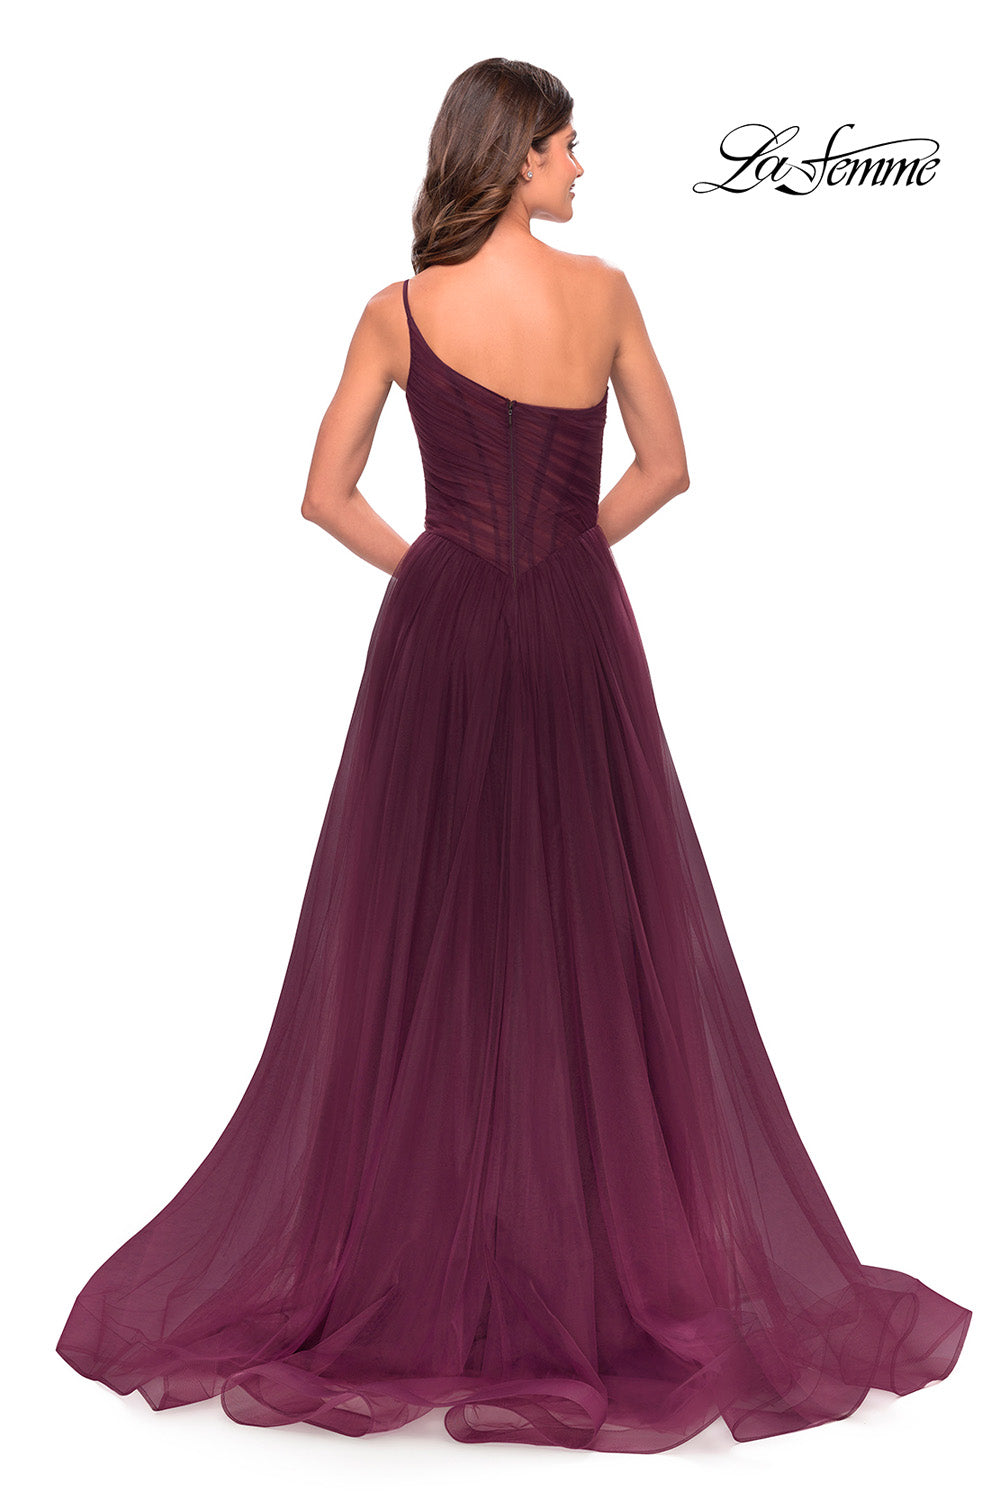 La Femme 31069 prom dress images.  La Femme 31069 is available in these colors: Black, Dark Berry, Dark Emerald, Navy.